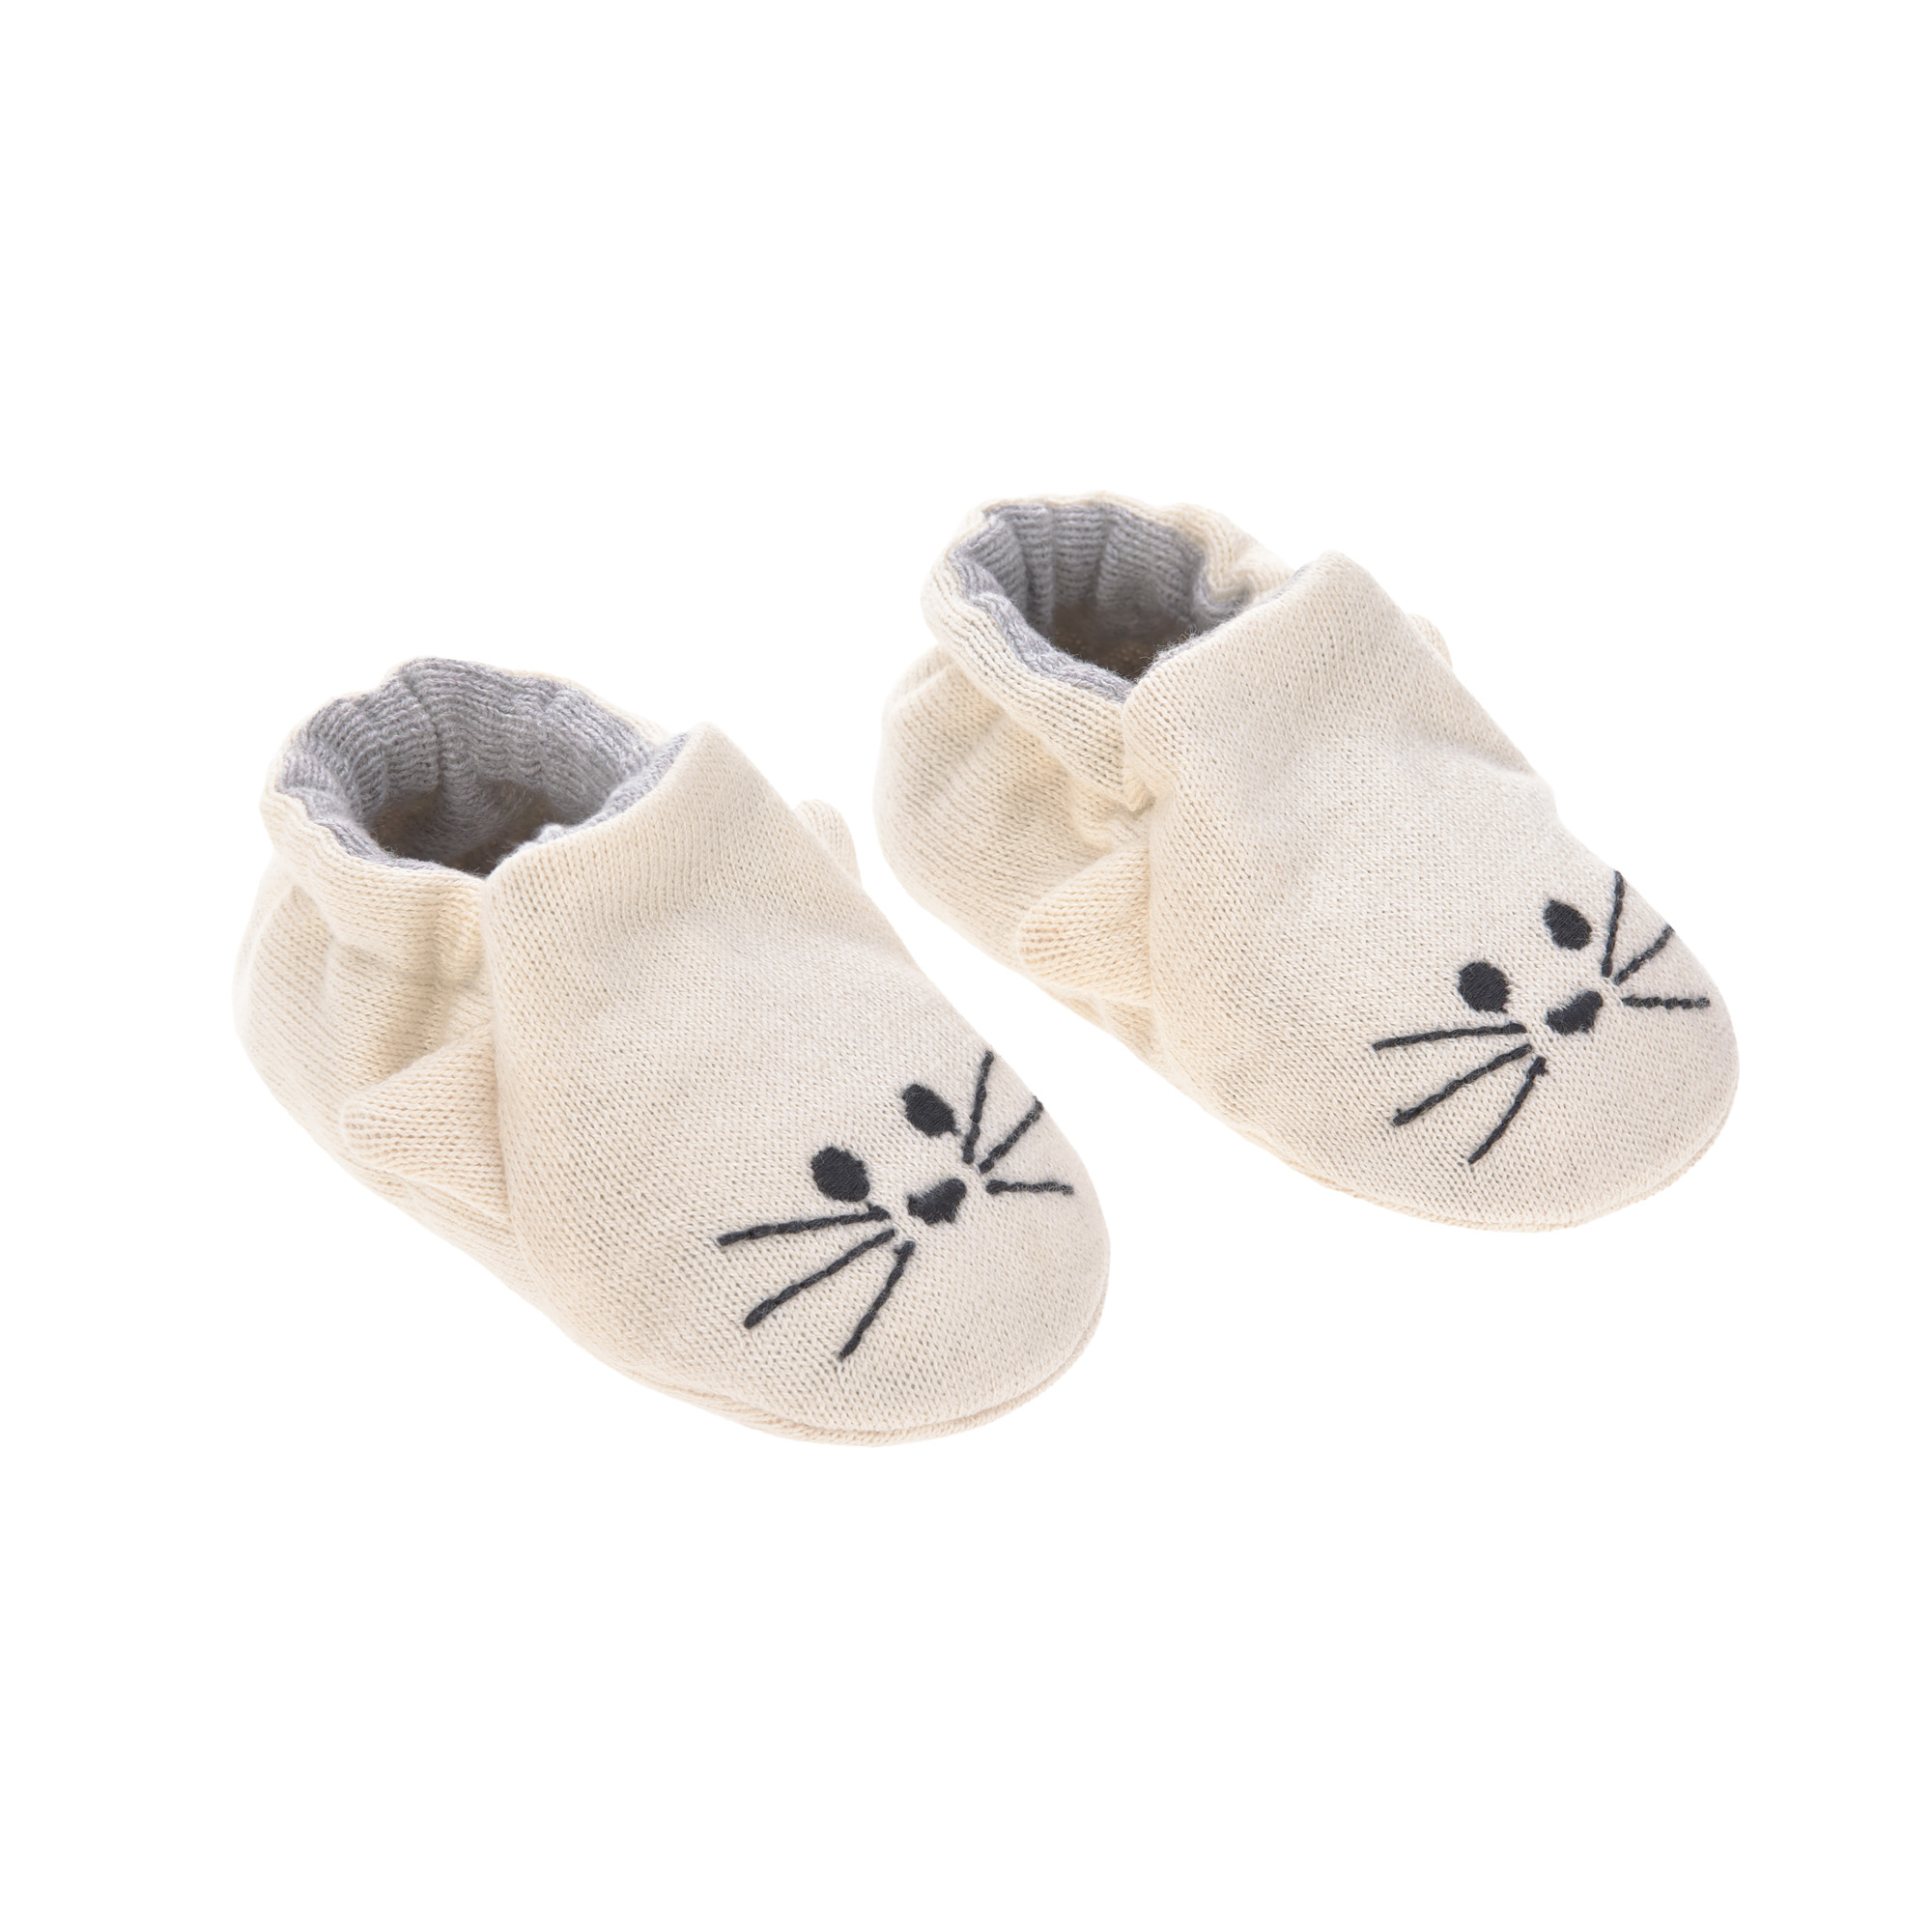 Lässig Baby Shoes GOTS Little Chums Cat One Size, 0-6 months, in cotton bag  - 4P - distributor of baby and kids products